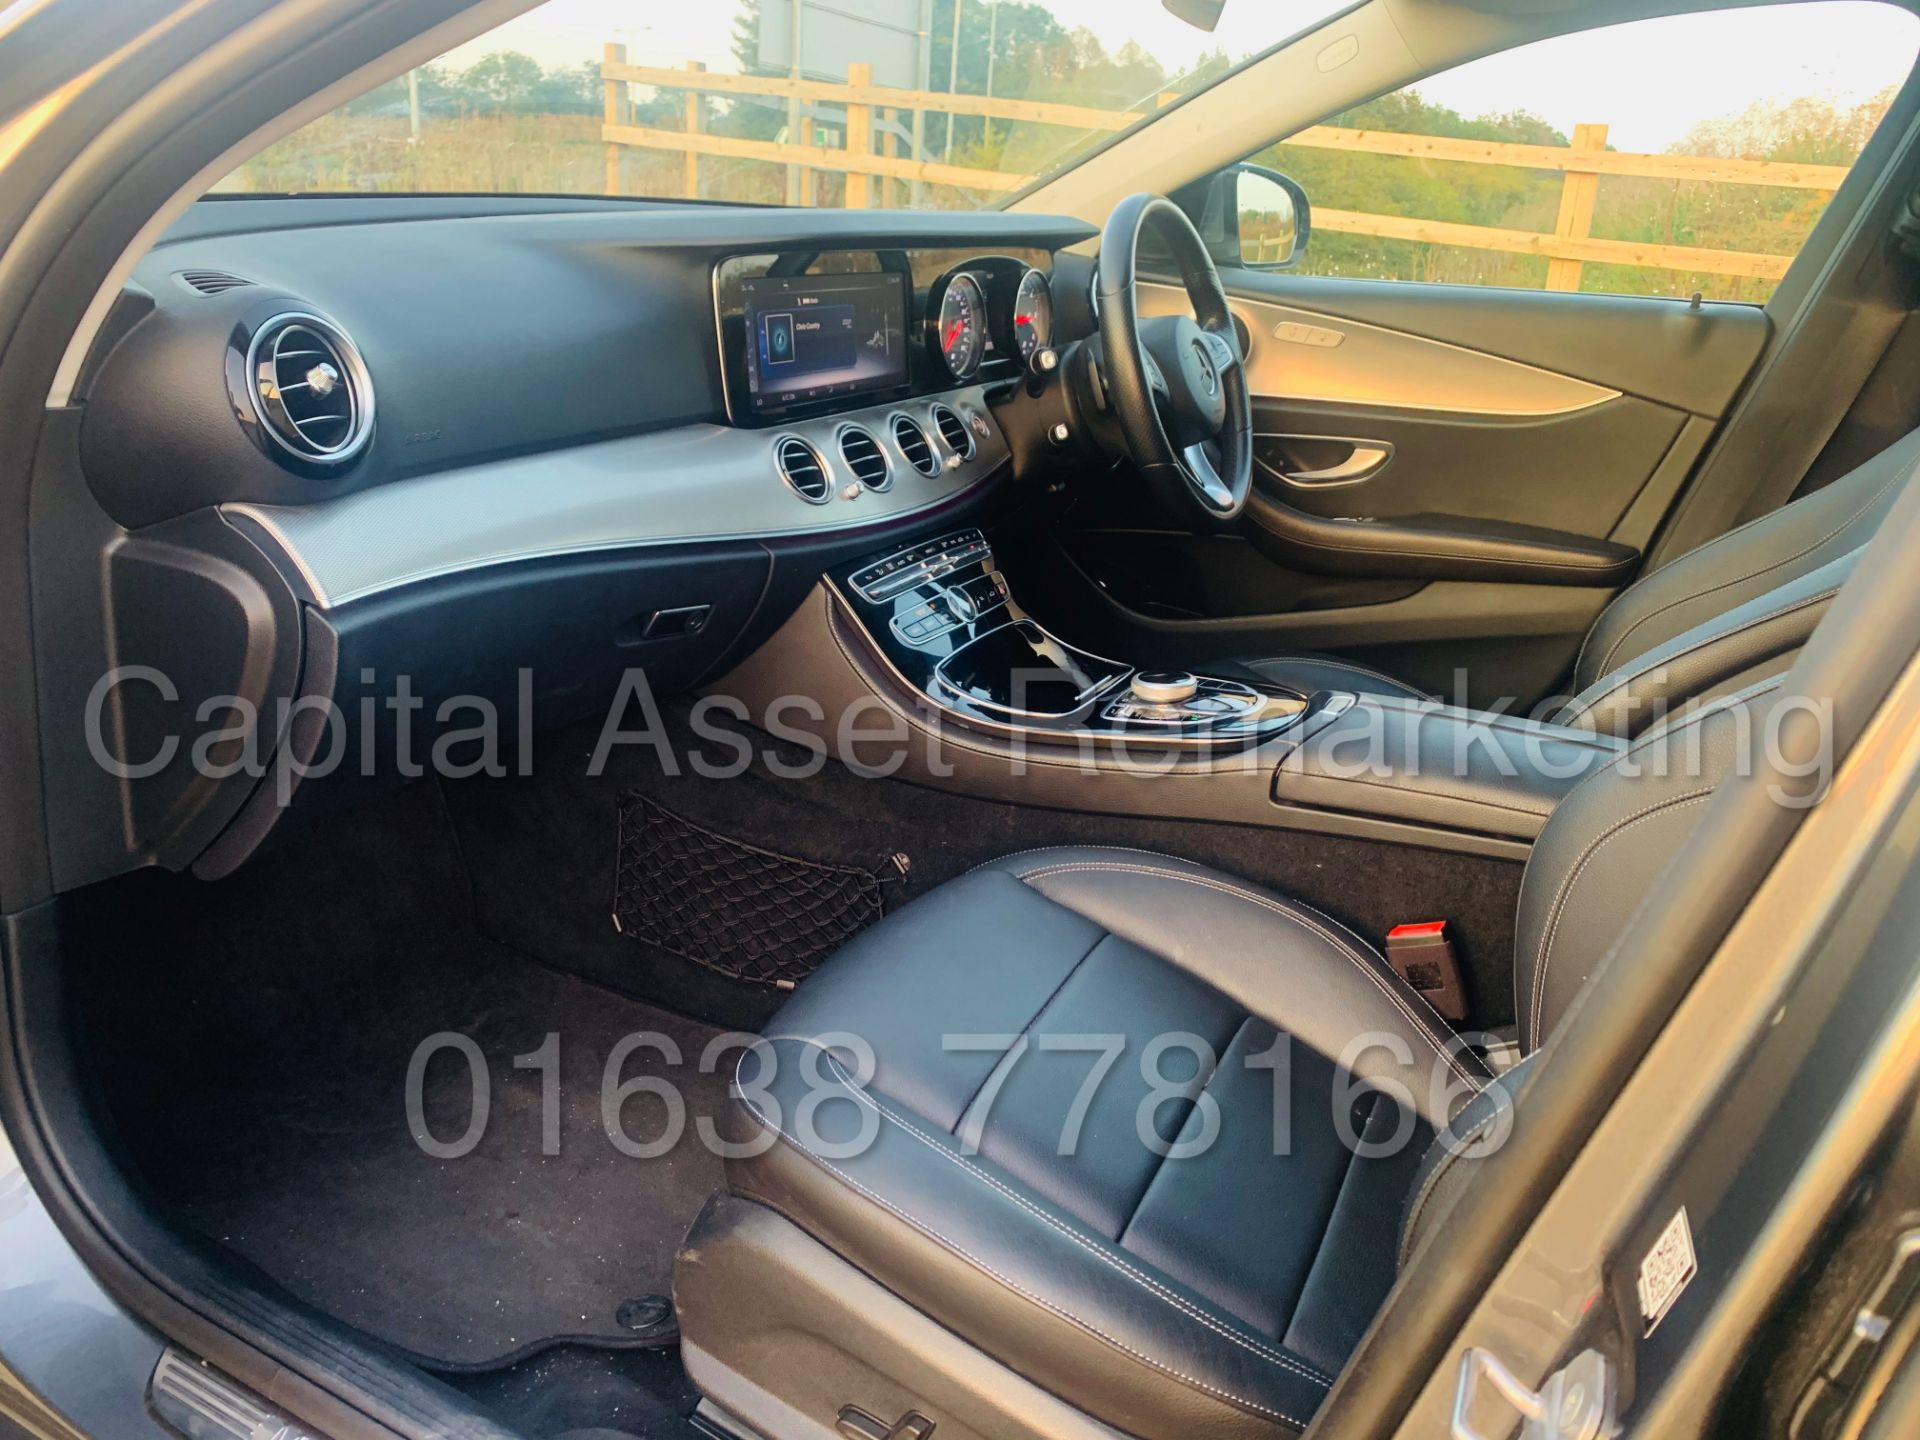 (On Sale) MERCEDES-BENZ E220D *SALOON* (2018 - NEW MODEL) '9-G TRONIC AUTO - LEATHER - SAT NAV' - Image 23 of 53